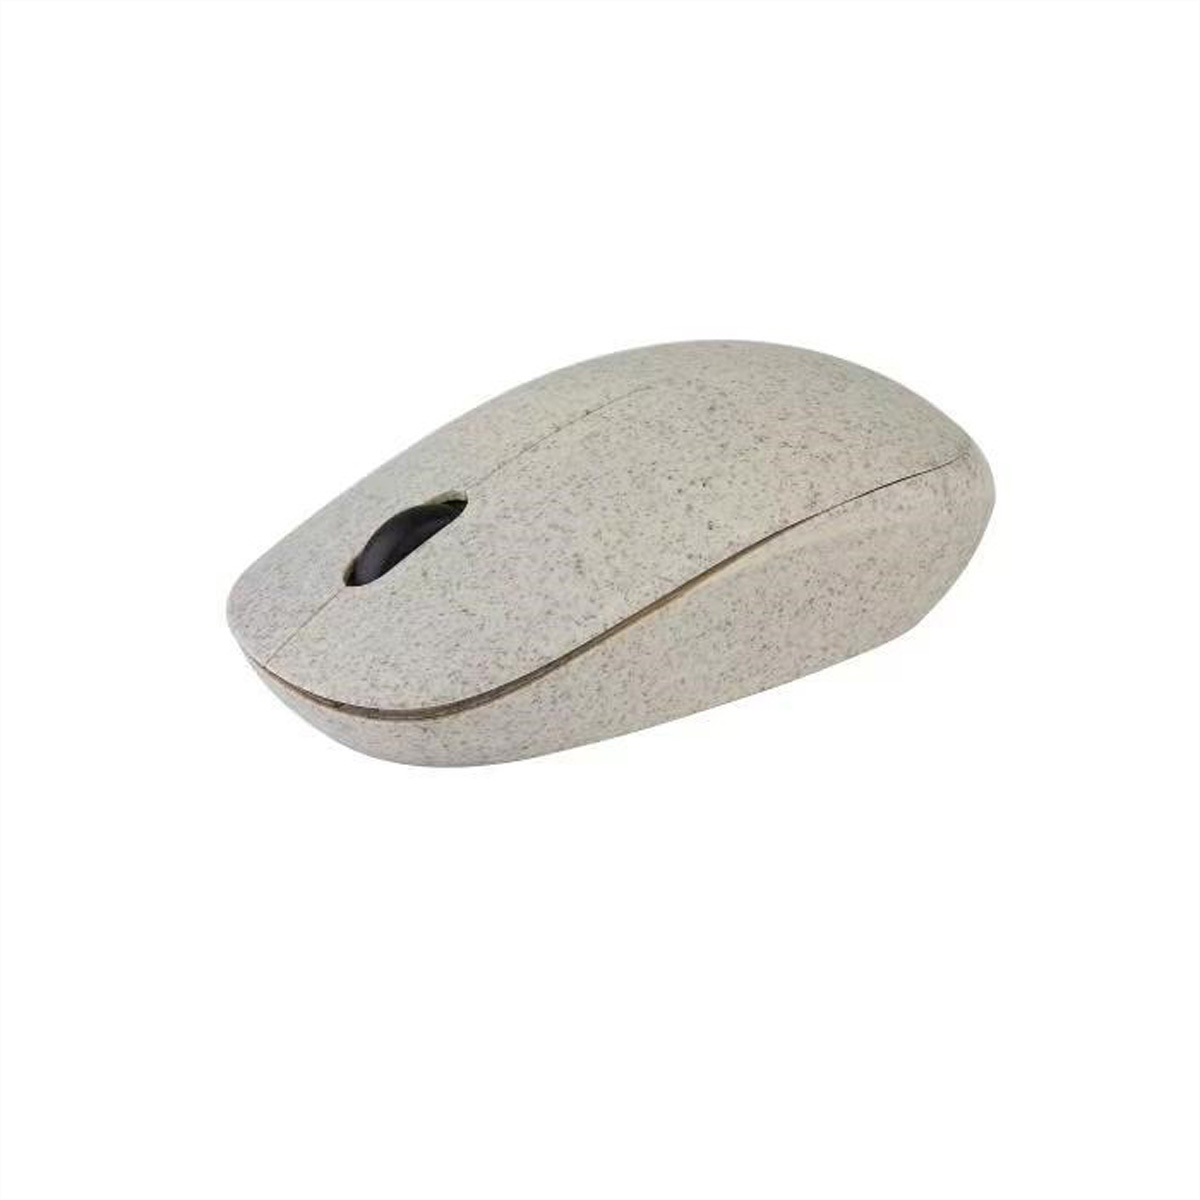 BIOnd BIO-MOS-15 Wireless Optical Mouse